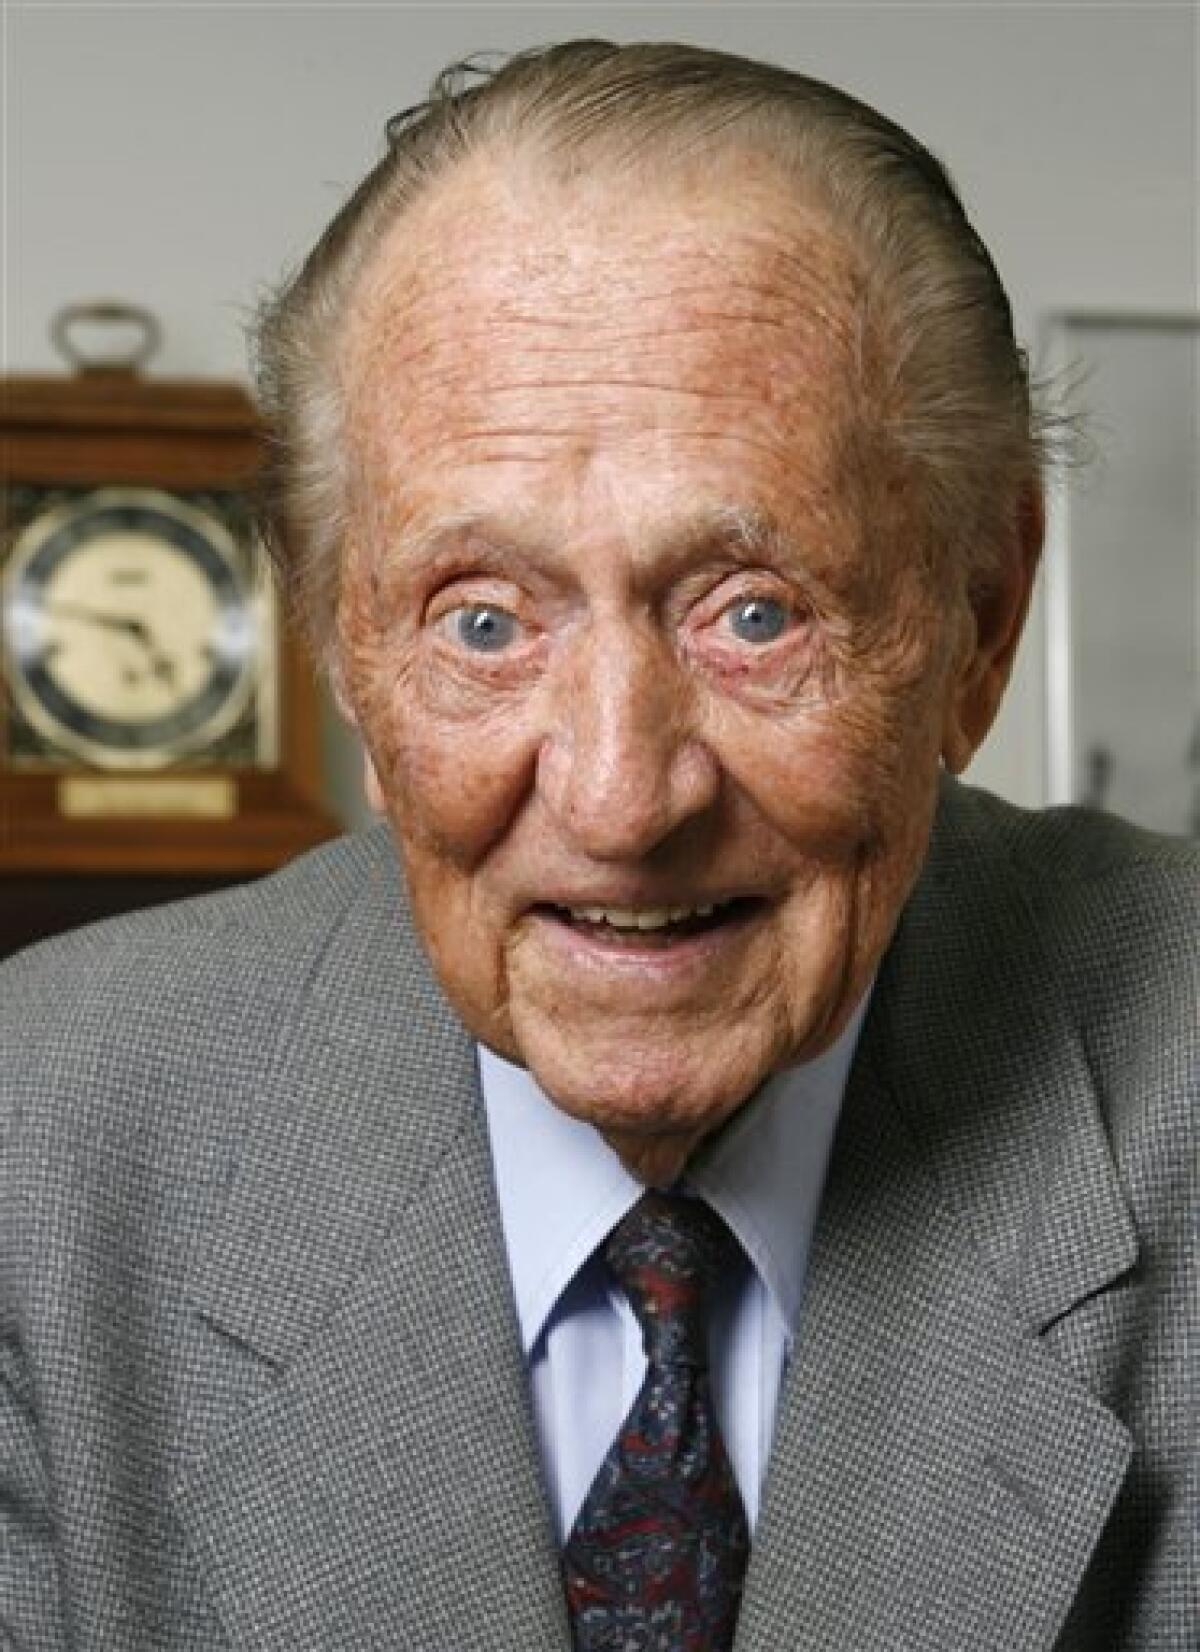 FILE - In this June 27, 2006 file photo, TV personality Art Linkletter poses for a photo at his office in Los Angeles. Linkletter, who hosted the popular TV shows "People Are Funny" and "House Party" in the 1950s and 1960s, died Wednesday, May 26, 2010 at his home in the Bel-Air section of Los Angeles. He was 97. (AP Photo/Damian Dovarganes, file)